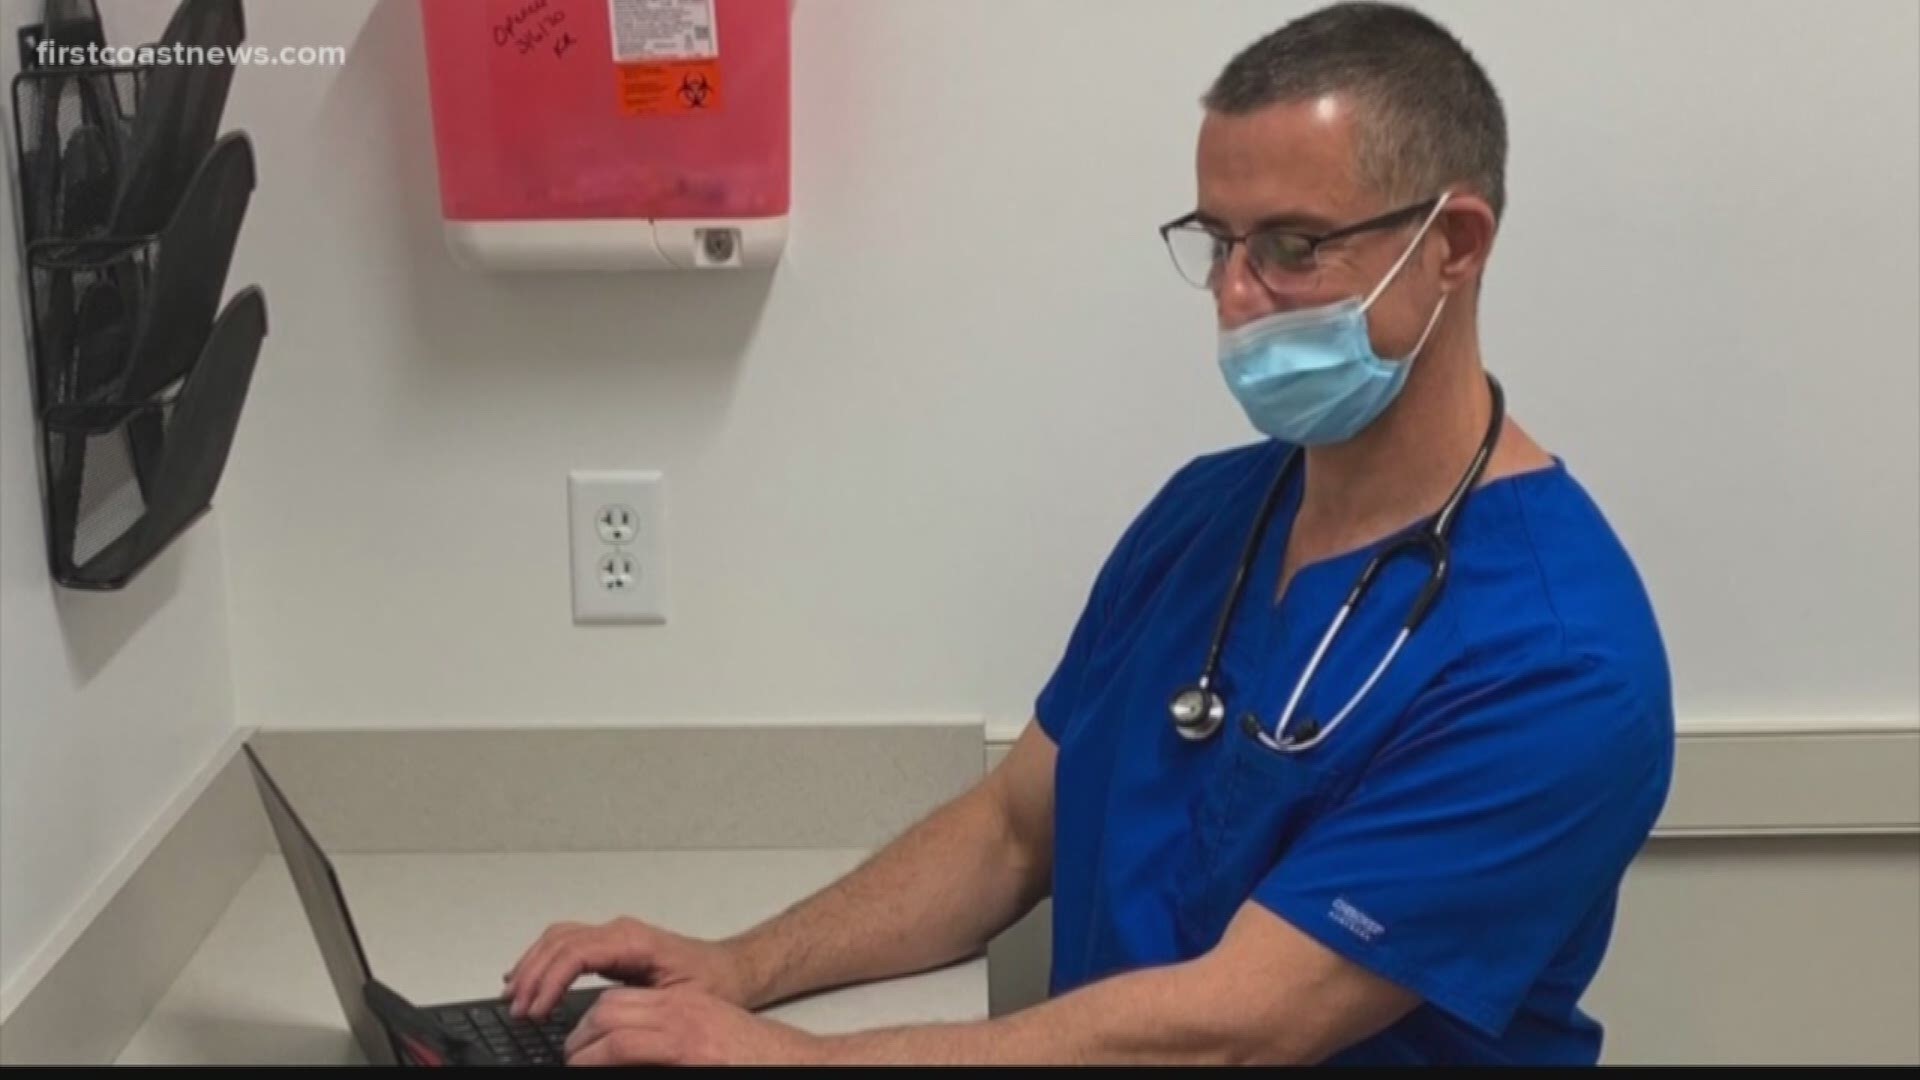 Doctors across the nation are changing their approach to patient care, and that includes pediatricians treating children right here on the First Coast.